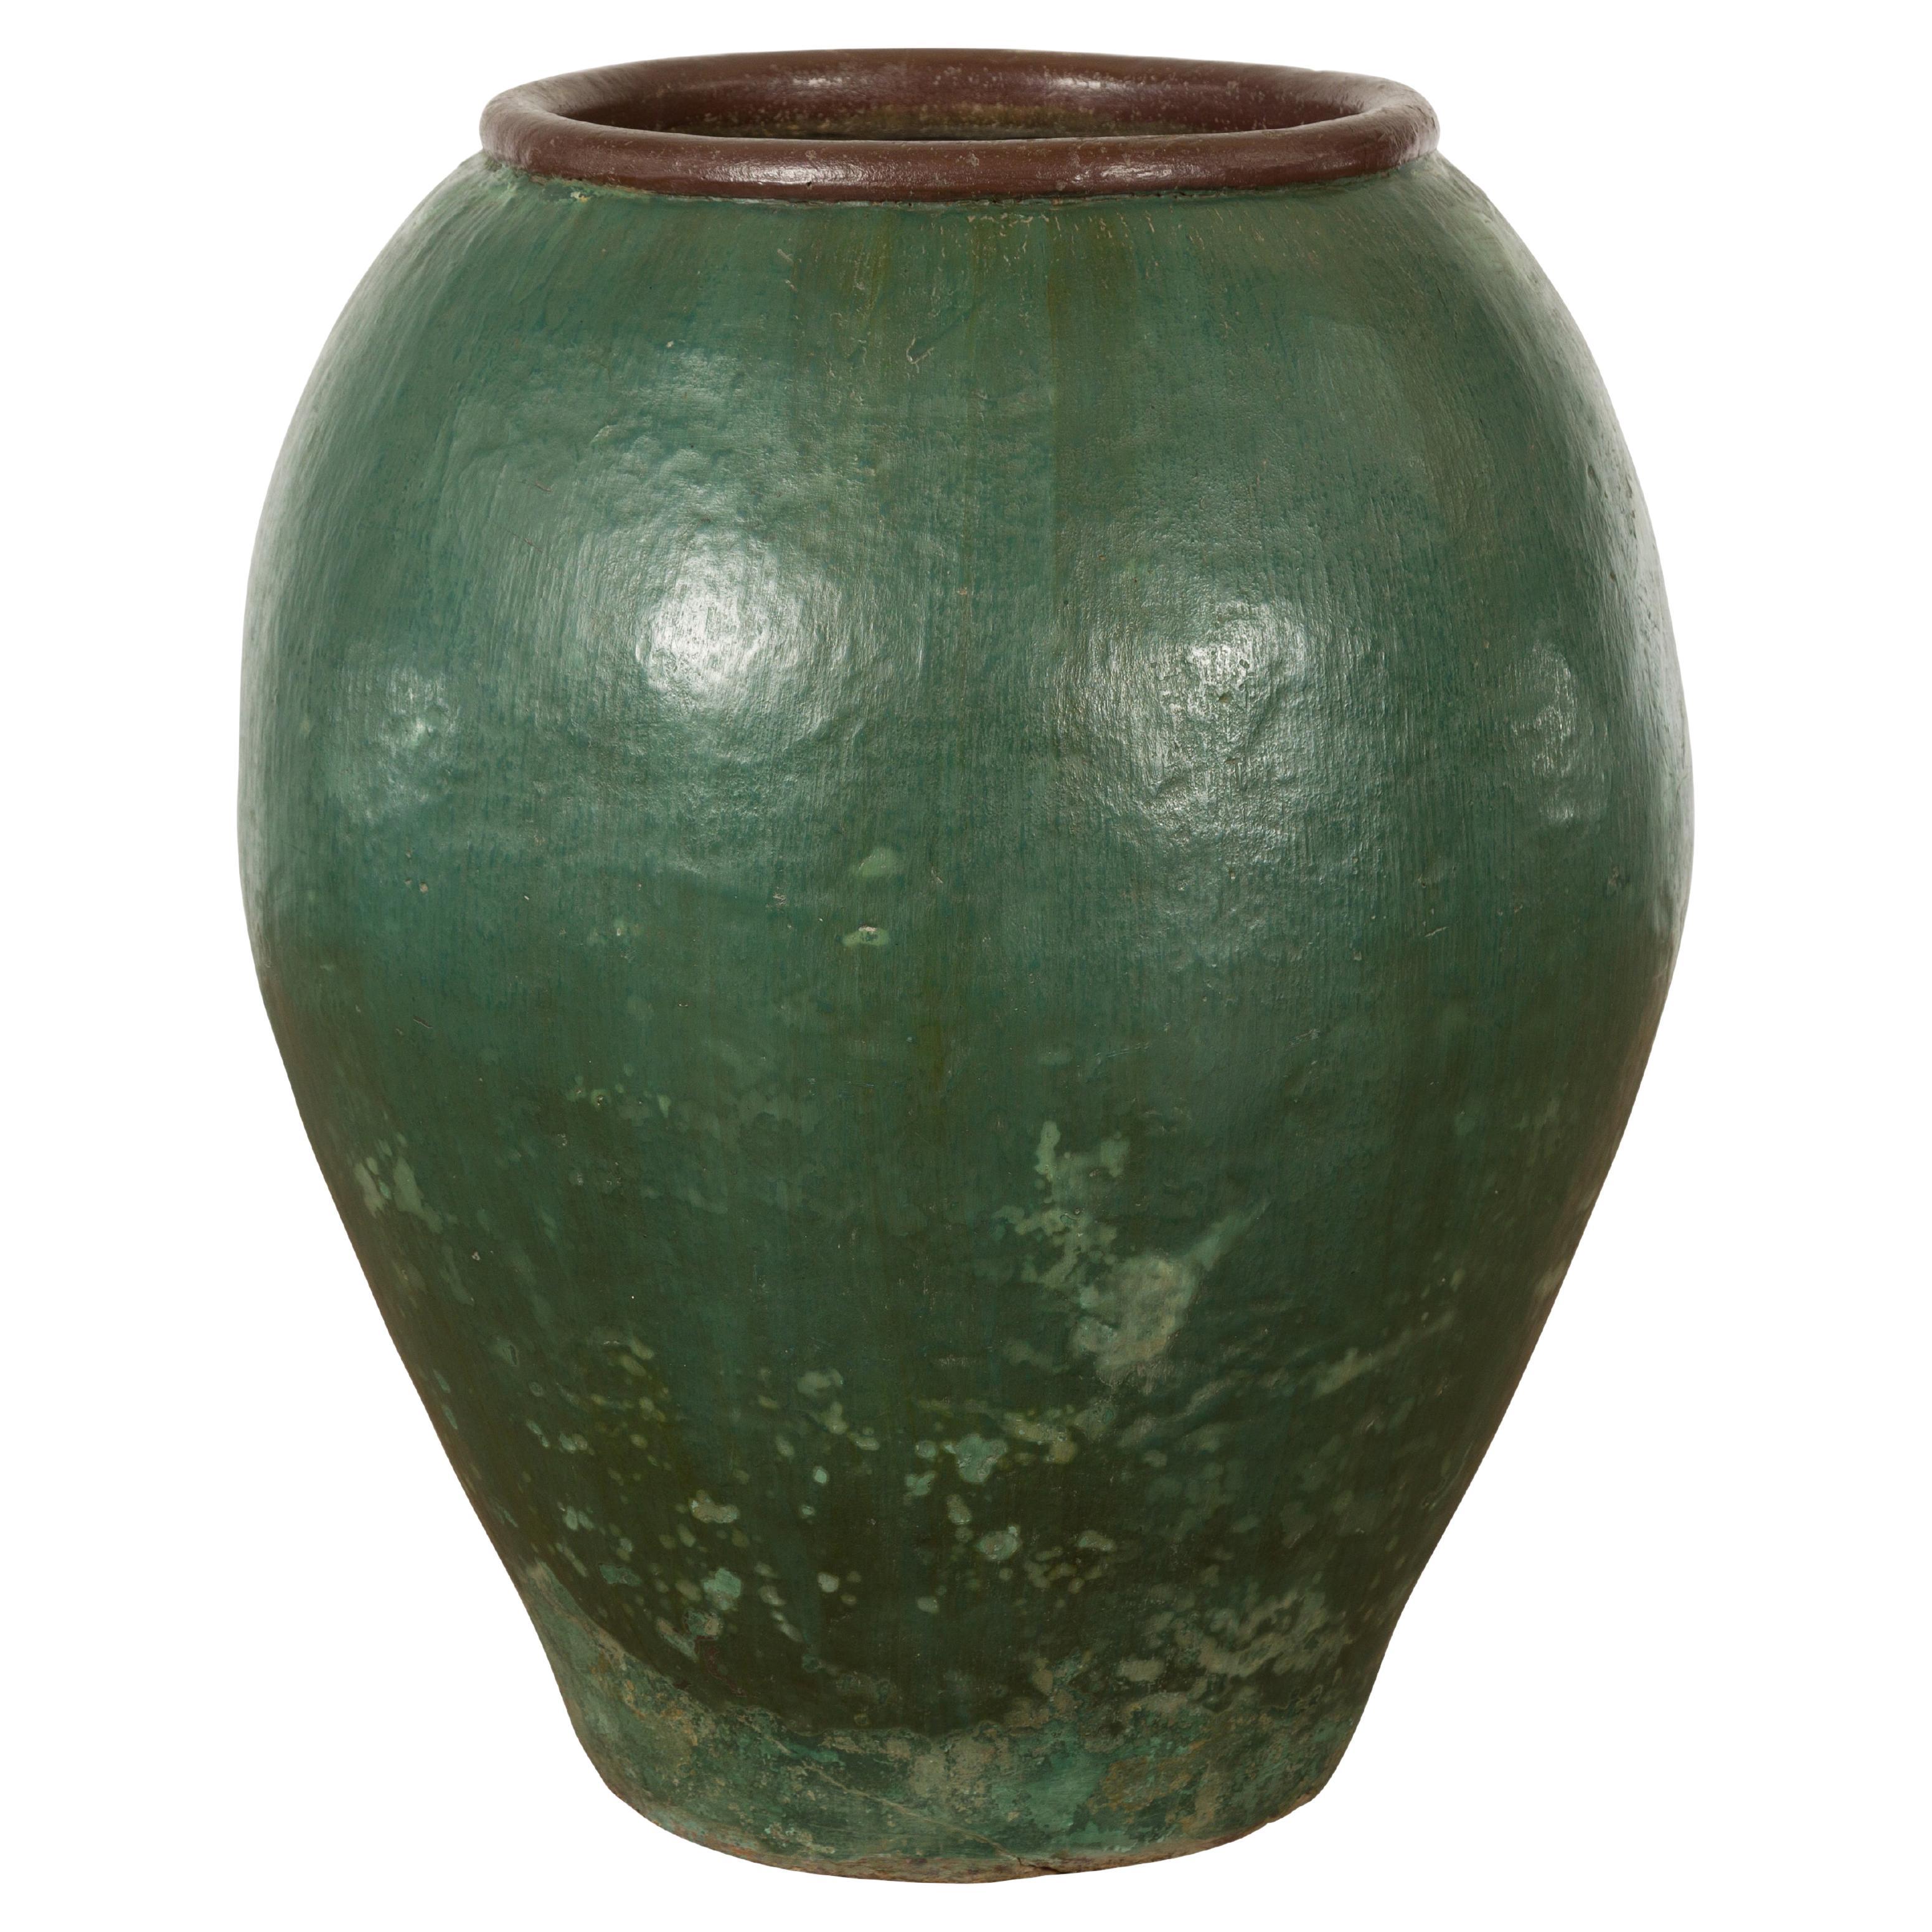 Large Thai 1950s Green Glazed Ceramic Planter with Brown Lip and Tapering Body